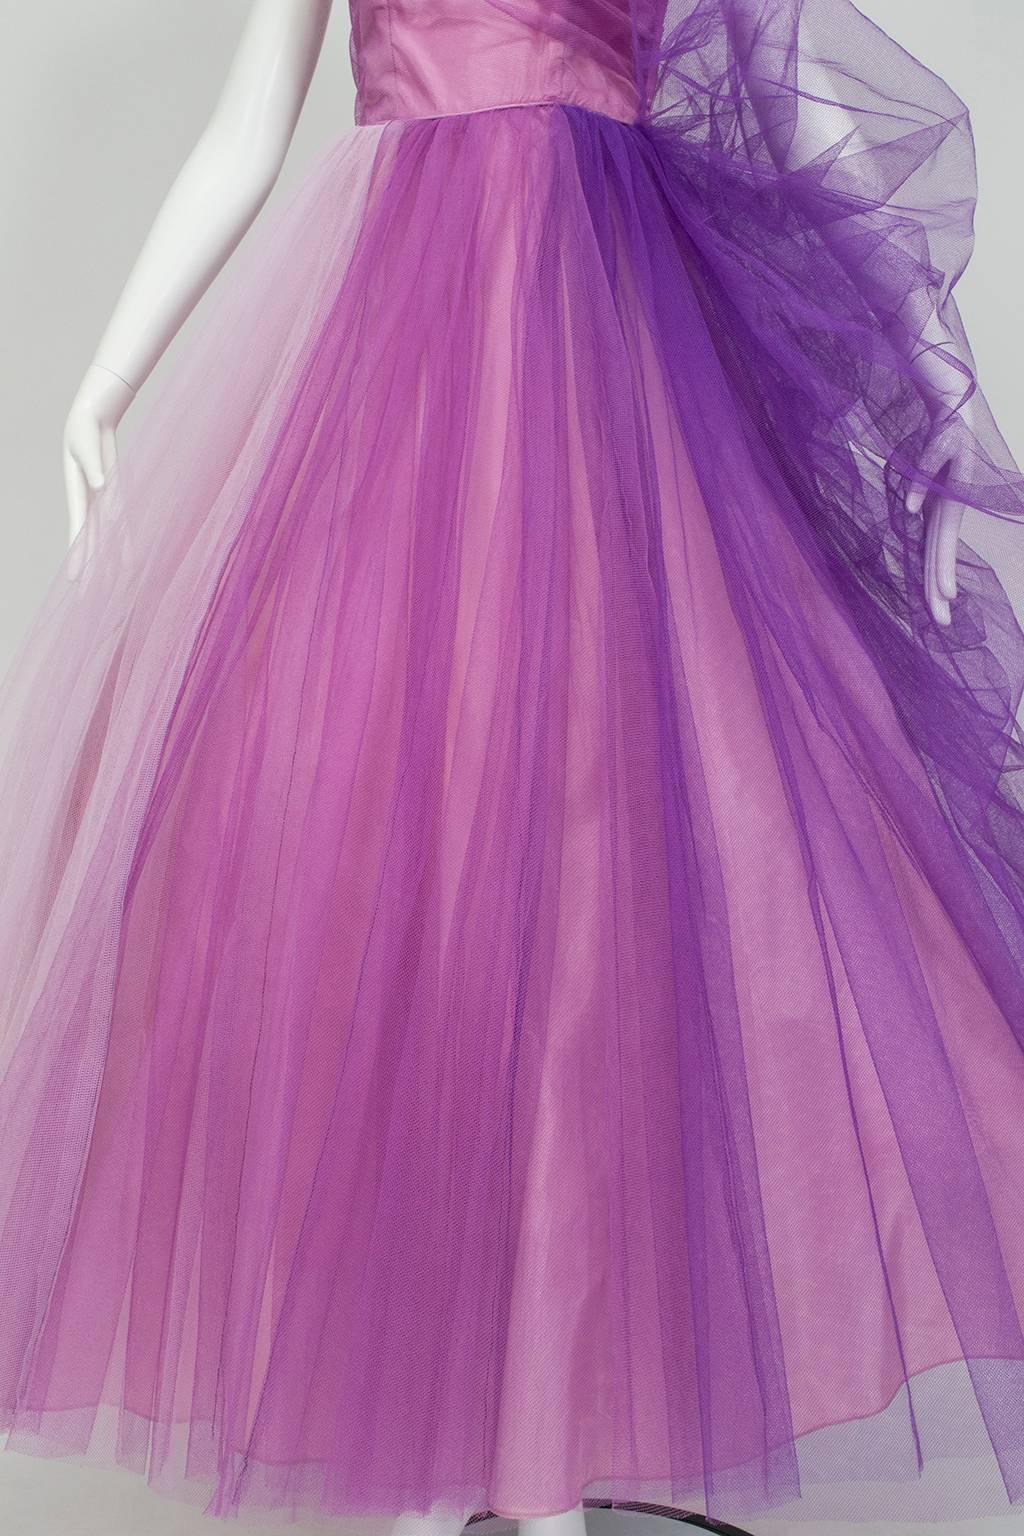 Emma Domb Violet Ombré Strapless Ball Gown, 1950s 4